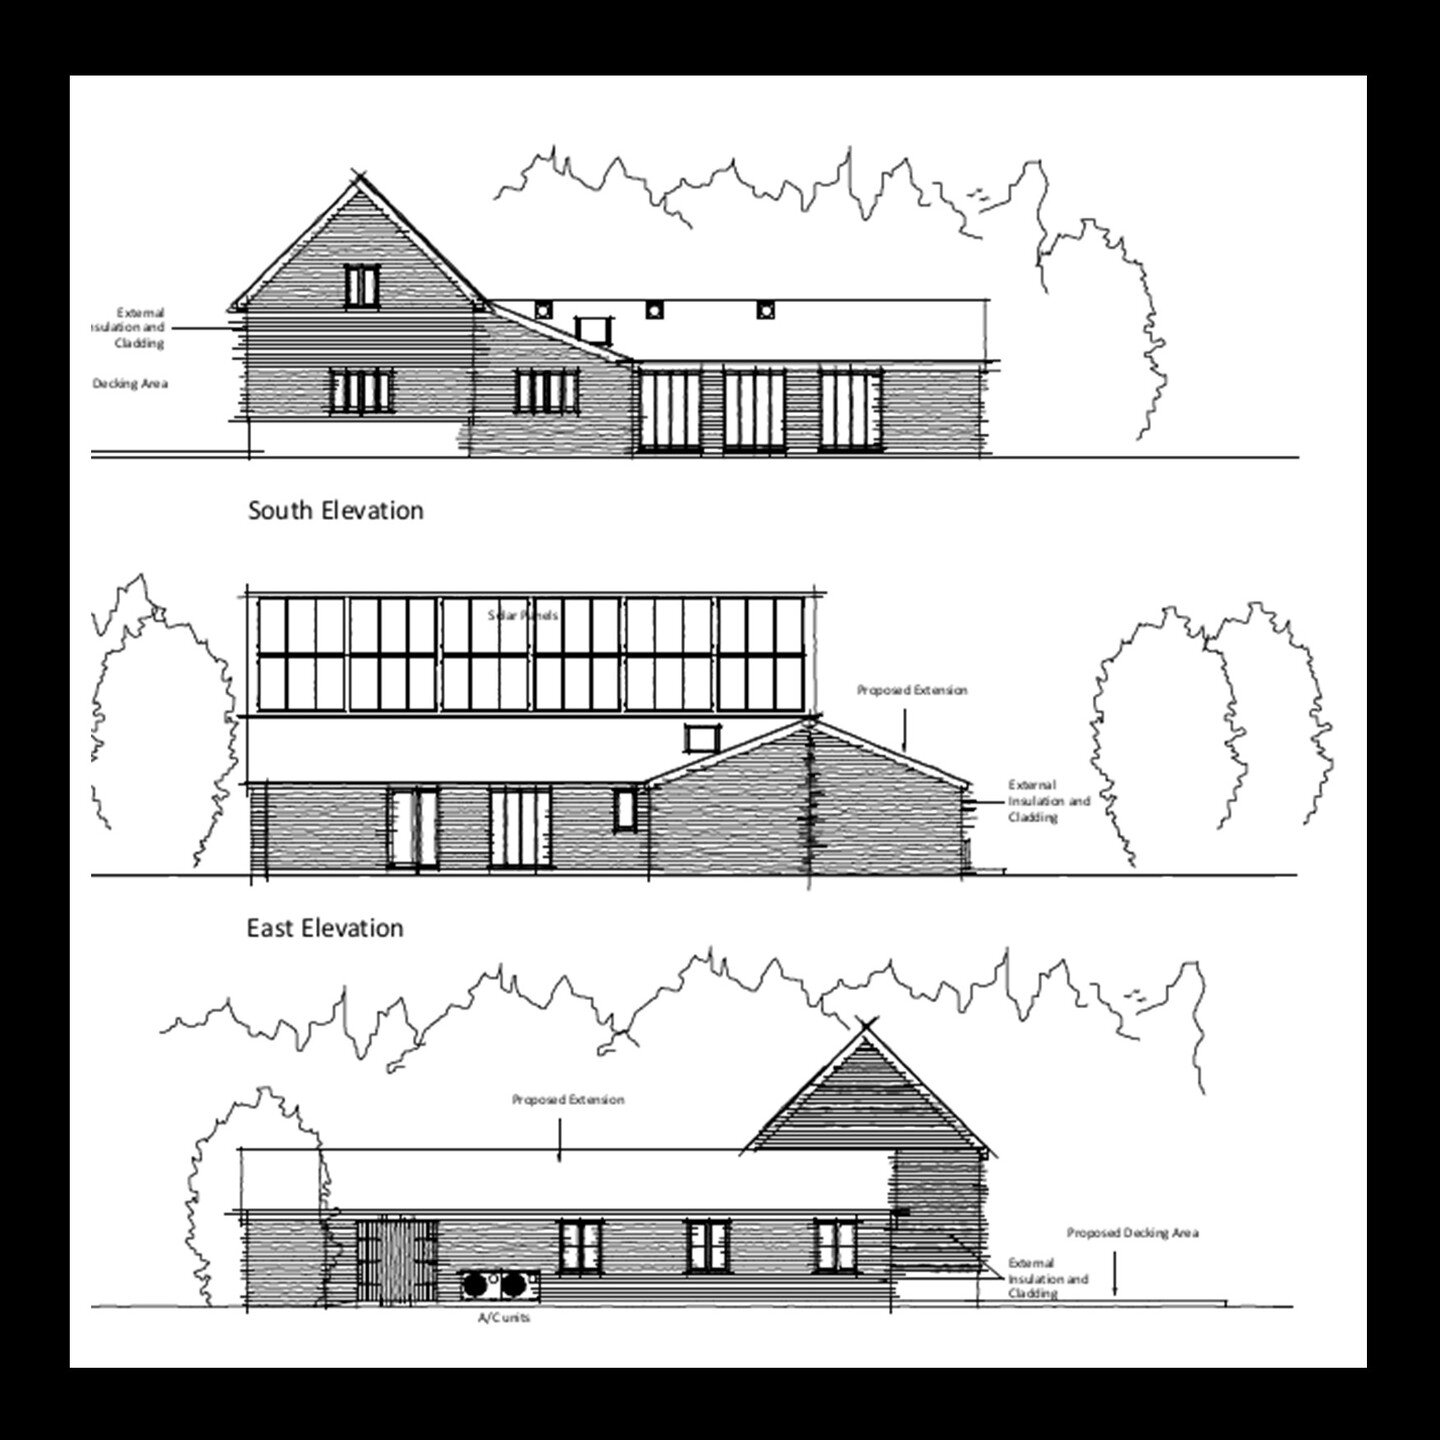 We are delighted to have secured planning permission for an extension and alterations to a barn in Colchester, Essex. The barn had a previous approval for a residential conversion, but the latest proposals sought an extension to the barn, the install